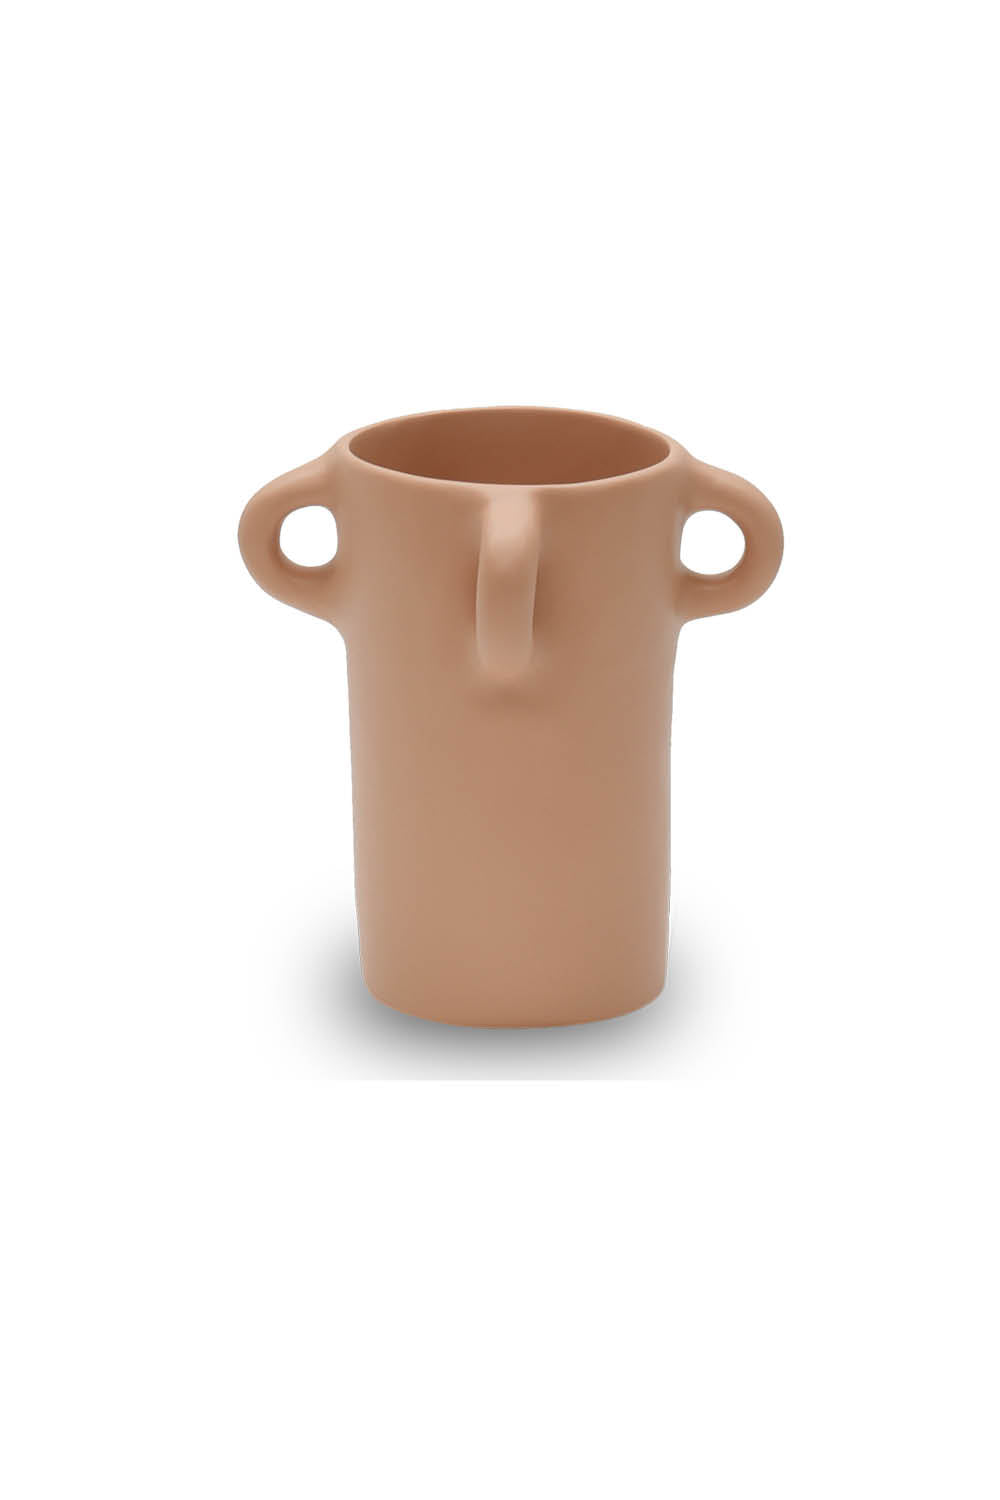 LOOPY Small Vase in Nude